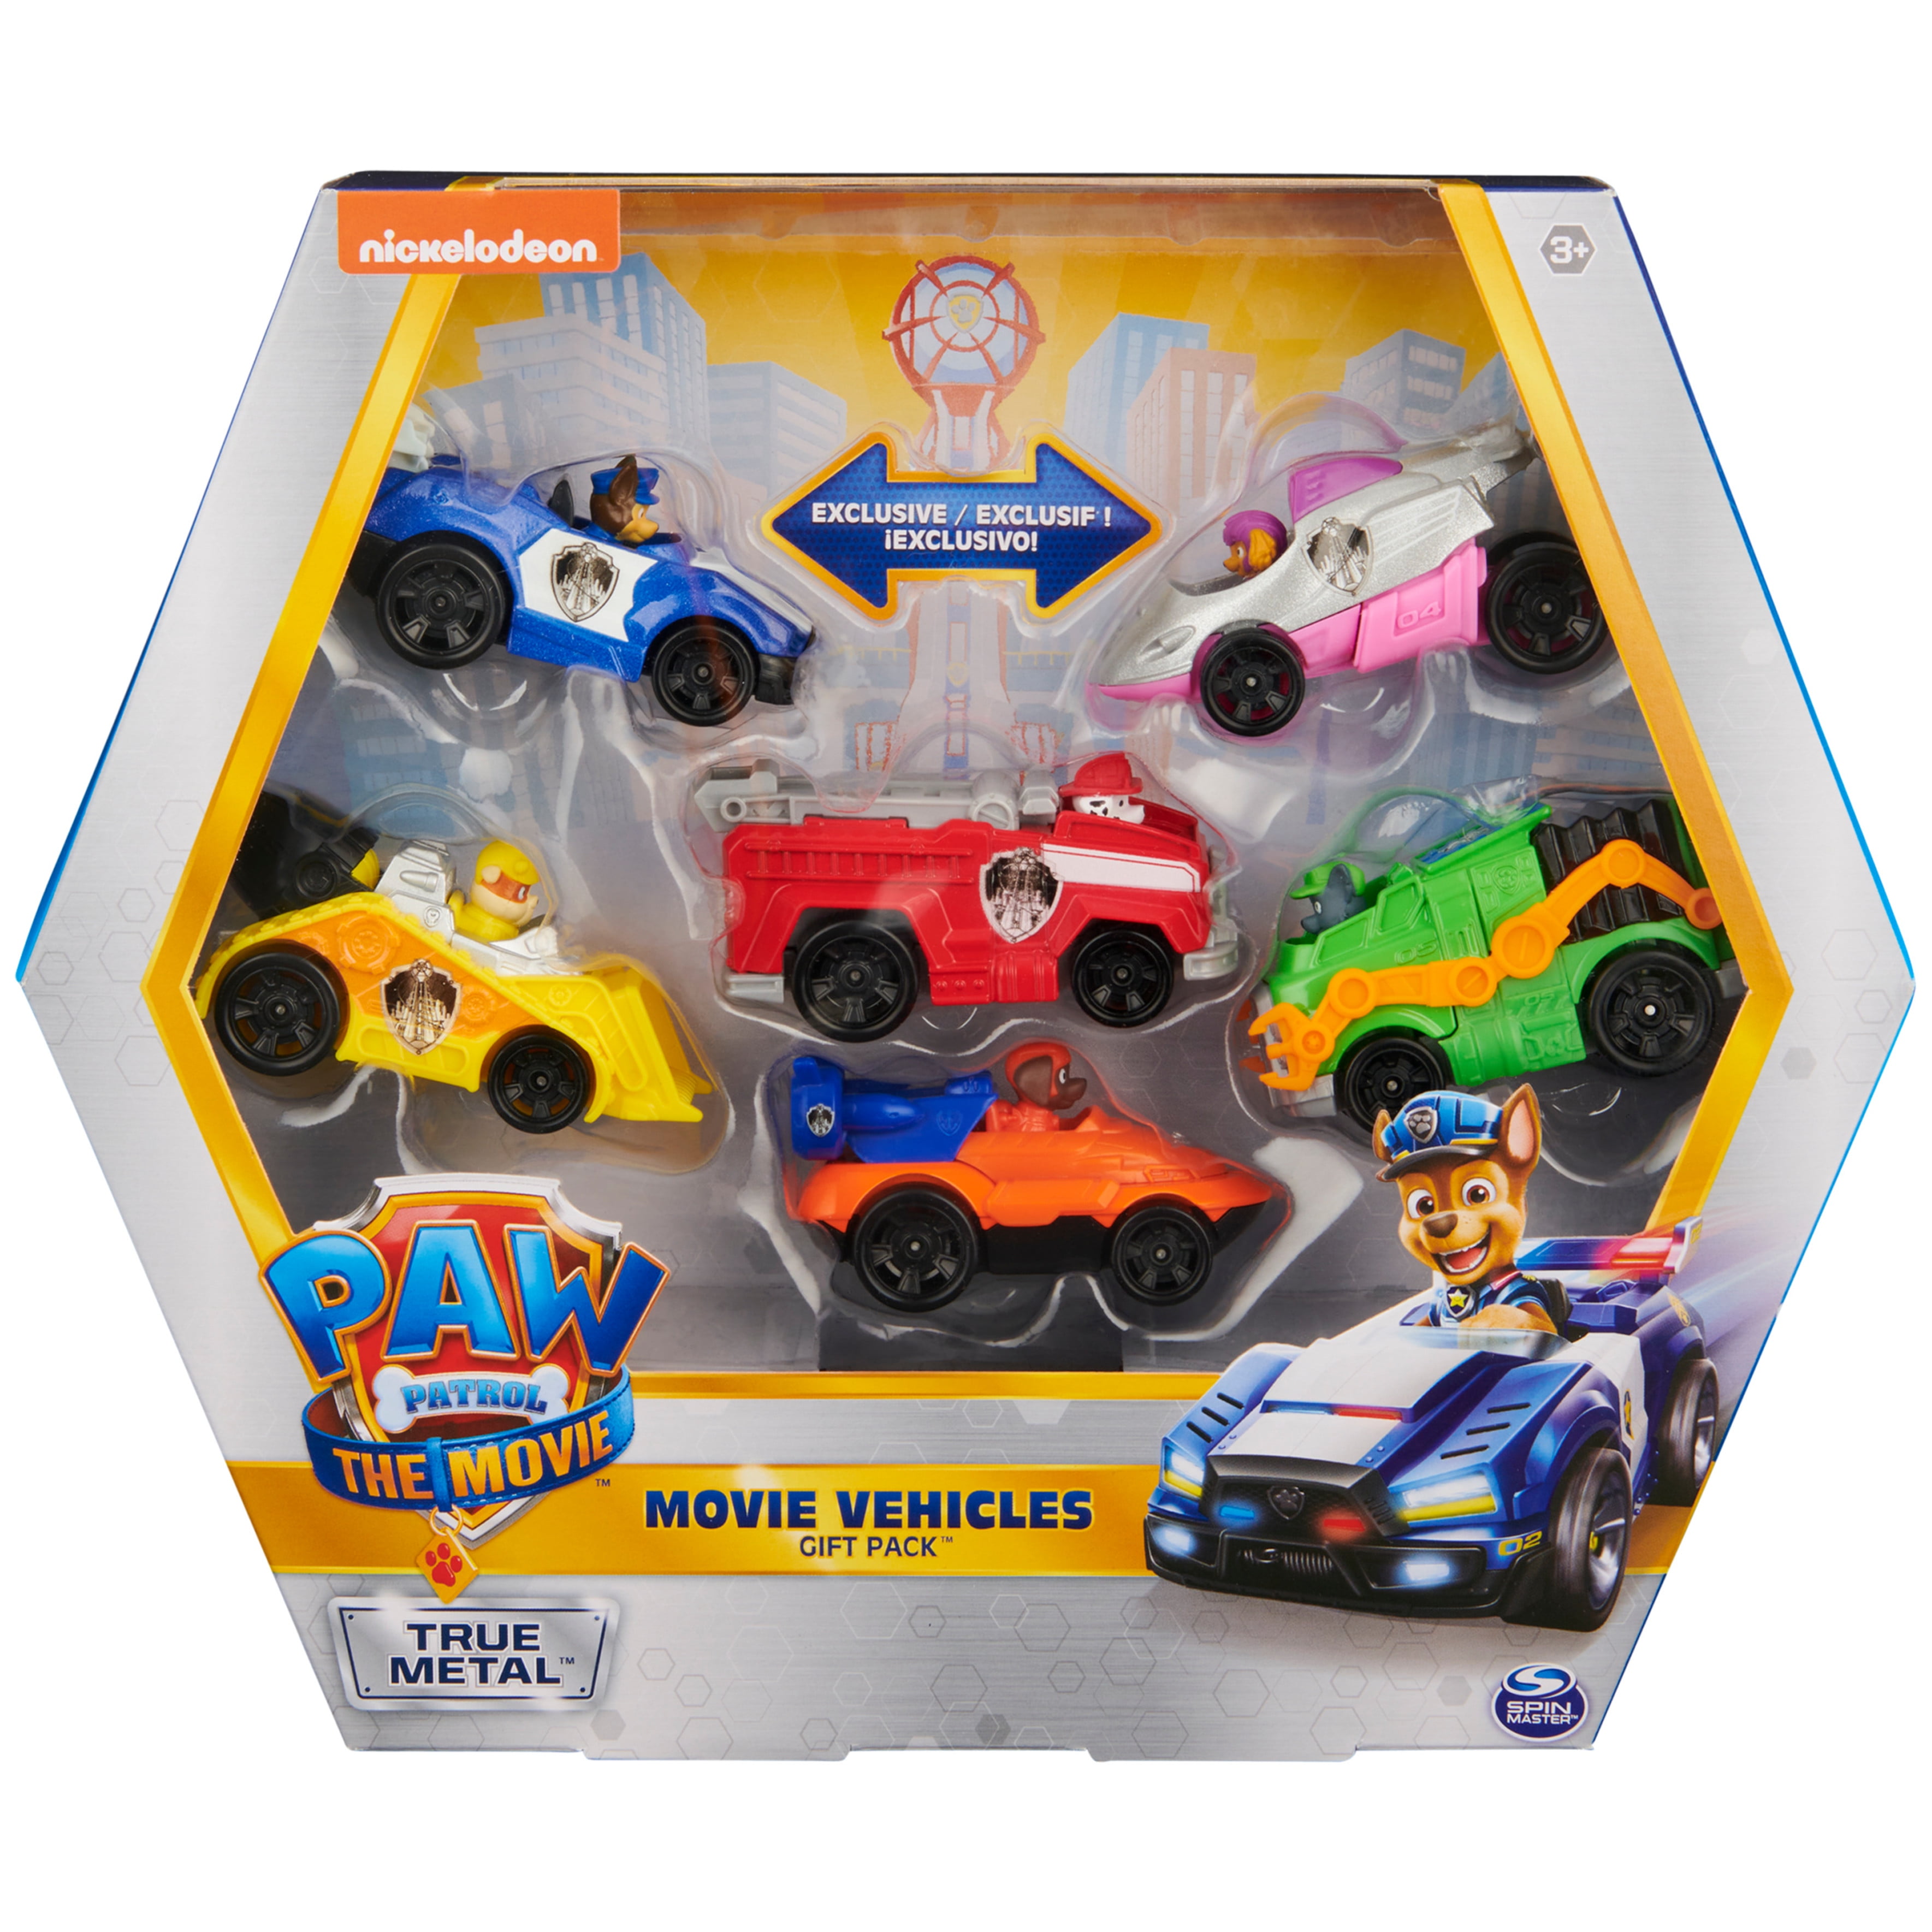 PAW Patrol, True Metal Movie Gift Pack with 6 Vehicles, 1:55 Scale 